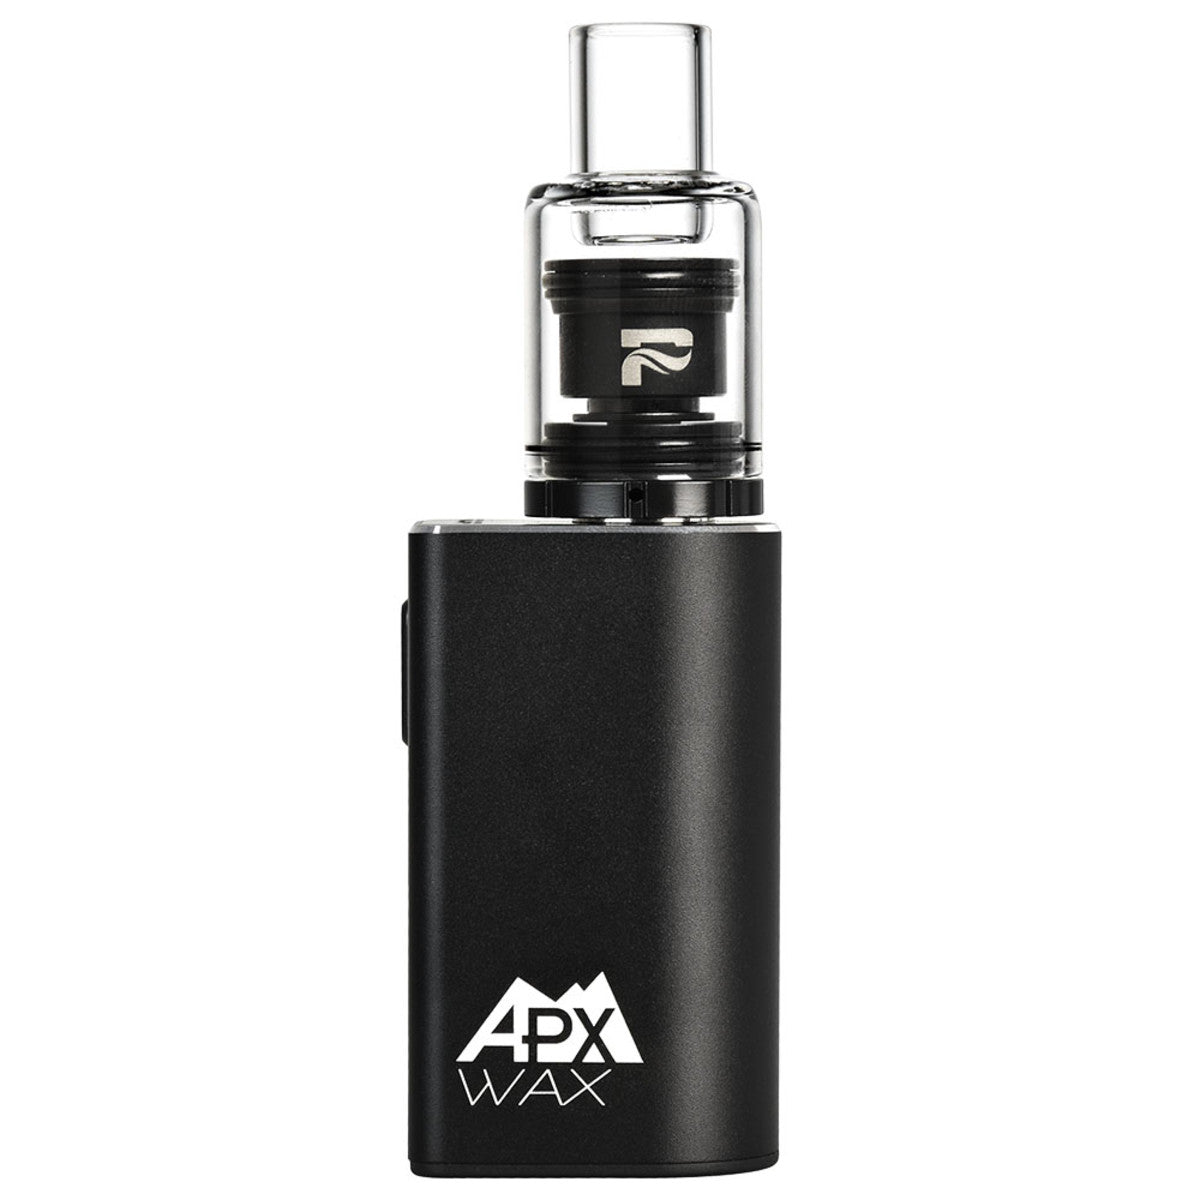 pulsar apx wax v3 concentrate vaporizer black